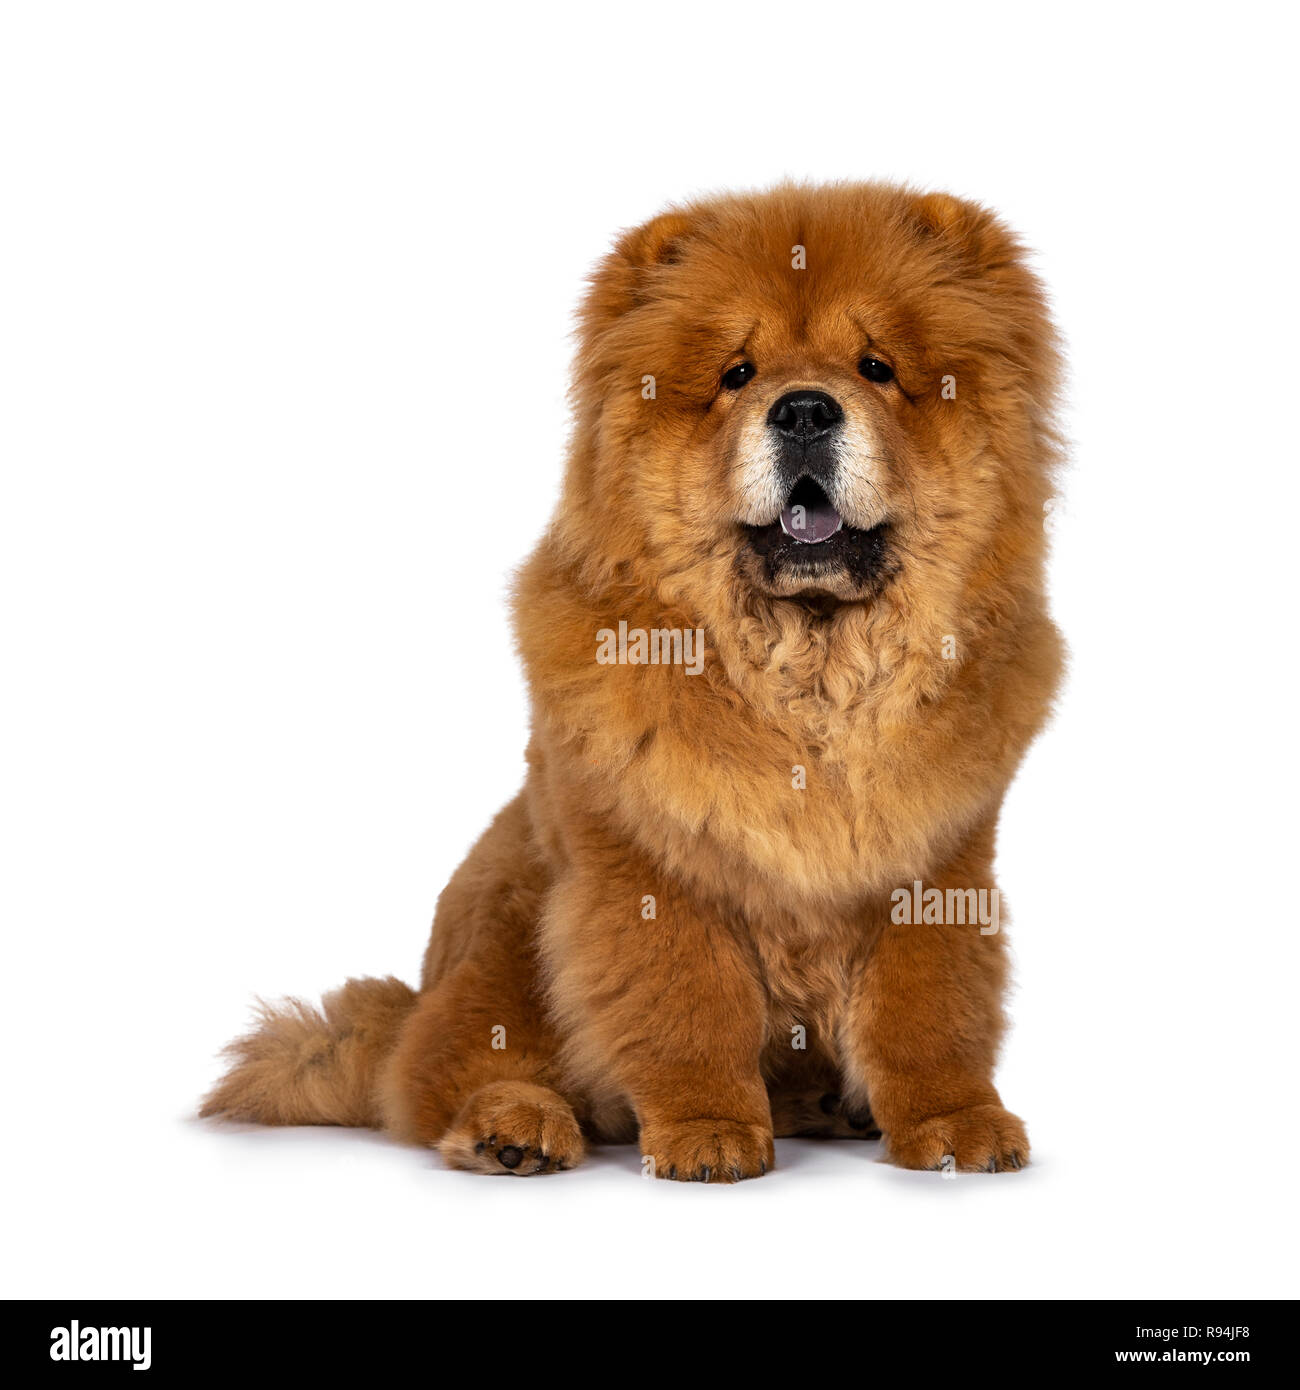 Cute fluffy Chow Chow pup dog, sitting straight up facing front looking at camera. Isolated on a white background. Mouth open, showing blue tongue. Stock Photo